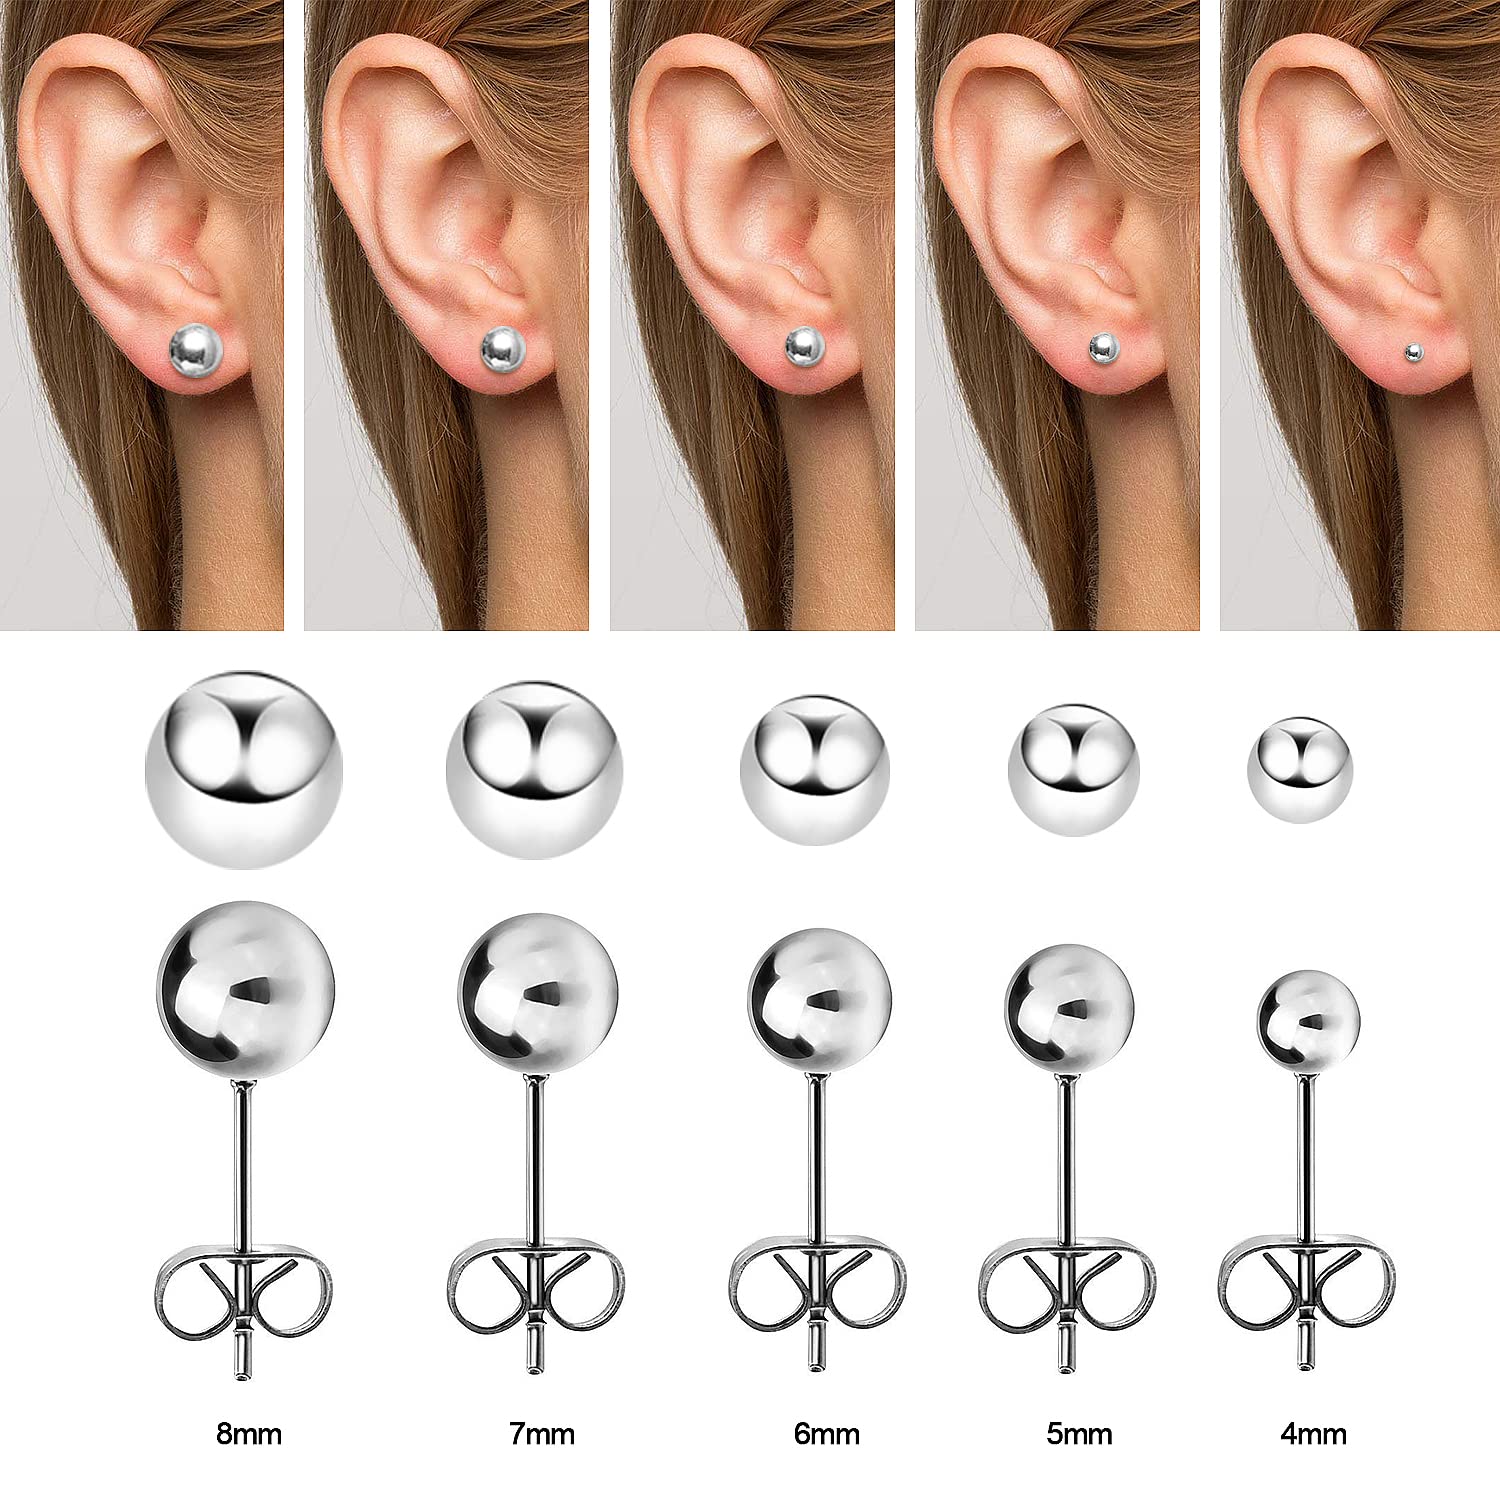 UHIBROS Hypoallergenic Studs Earrings 316L Surgical Stainless Steel Earrings Round Ball Earring for Women Men 5 Pairs Assorted Sizes(4mm-8mm)